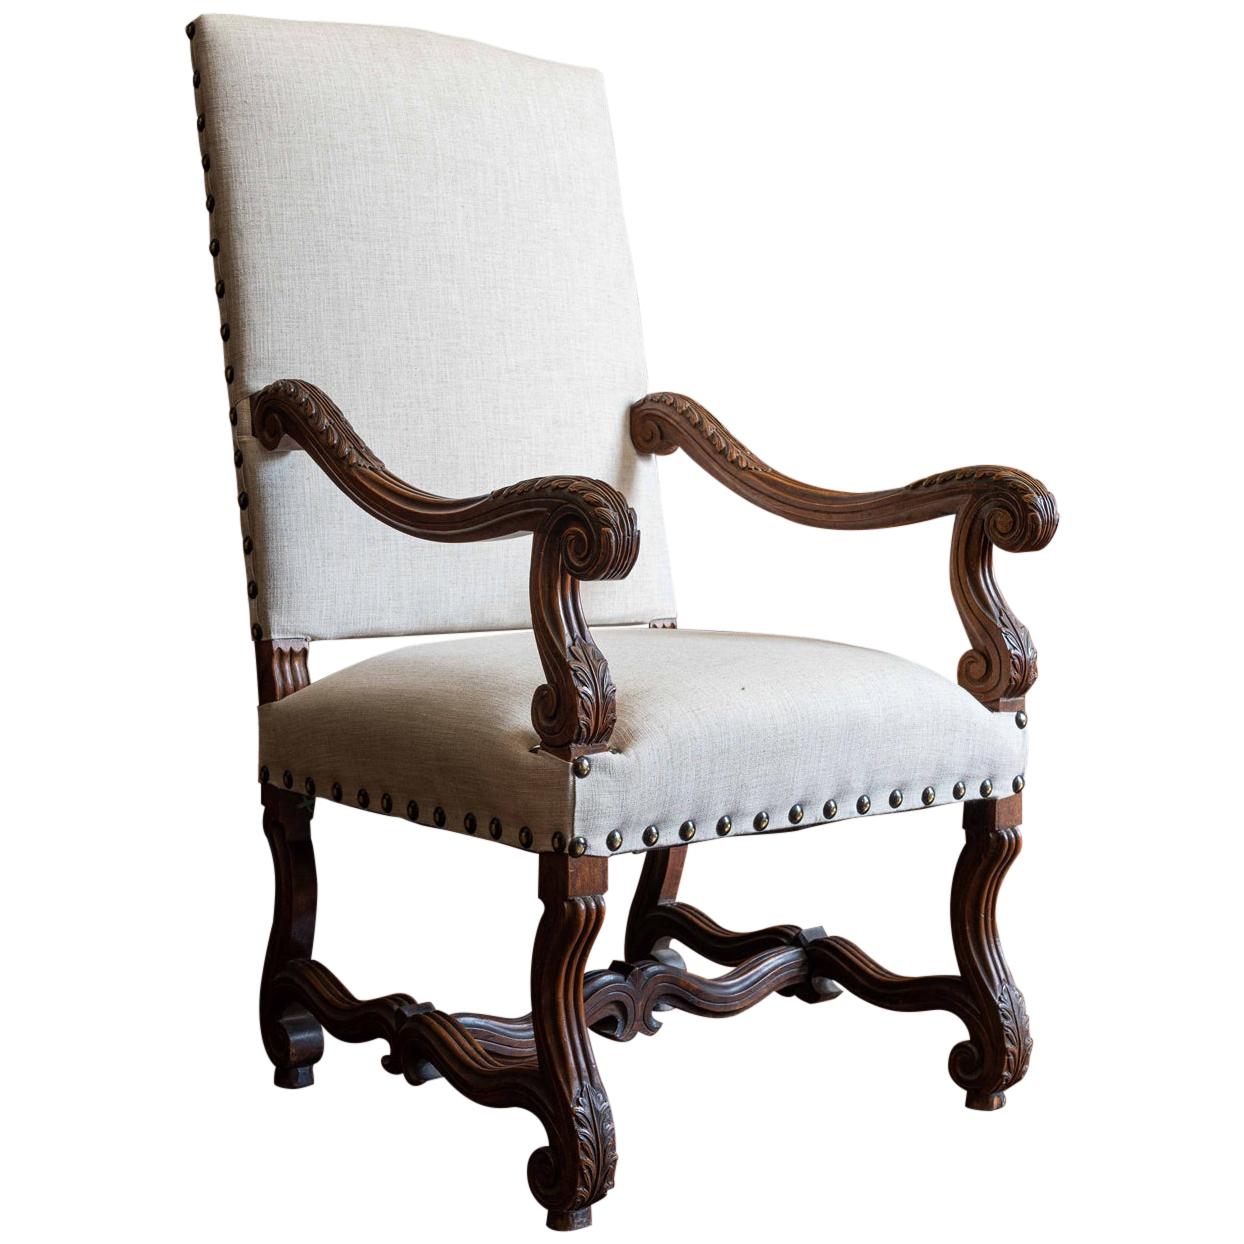 19th Century French Mahogany Louis XIV Style Armchair Reupholstered in Linen